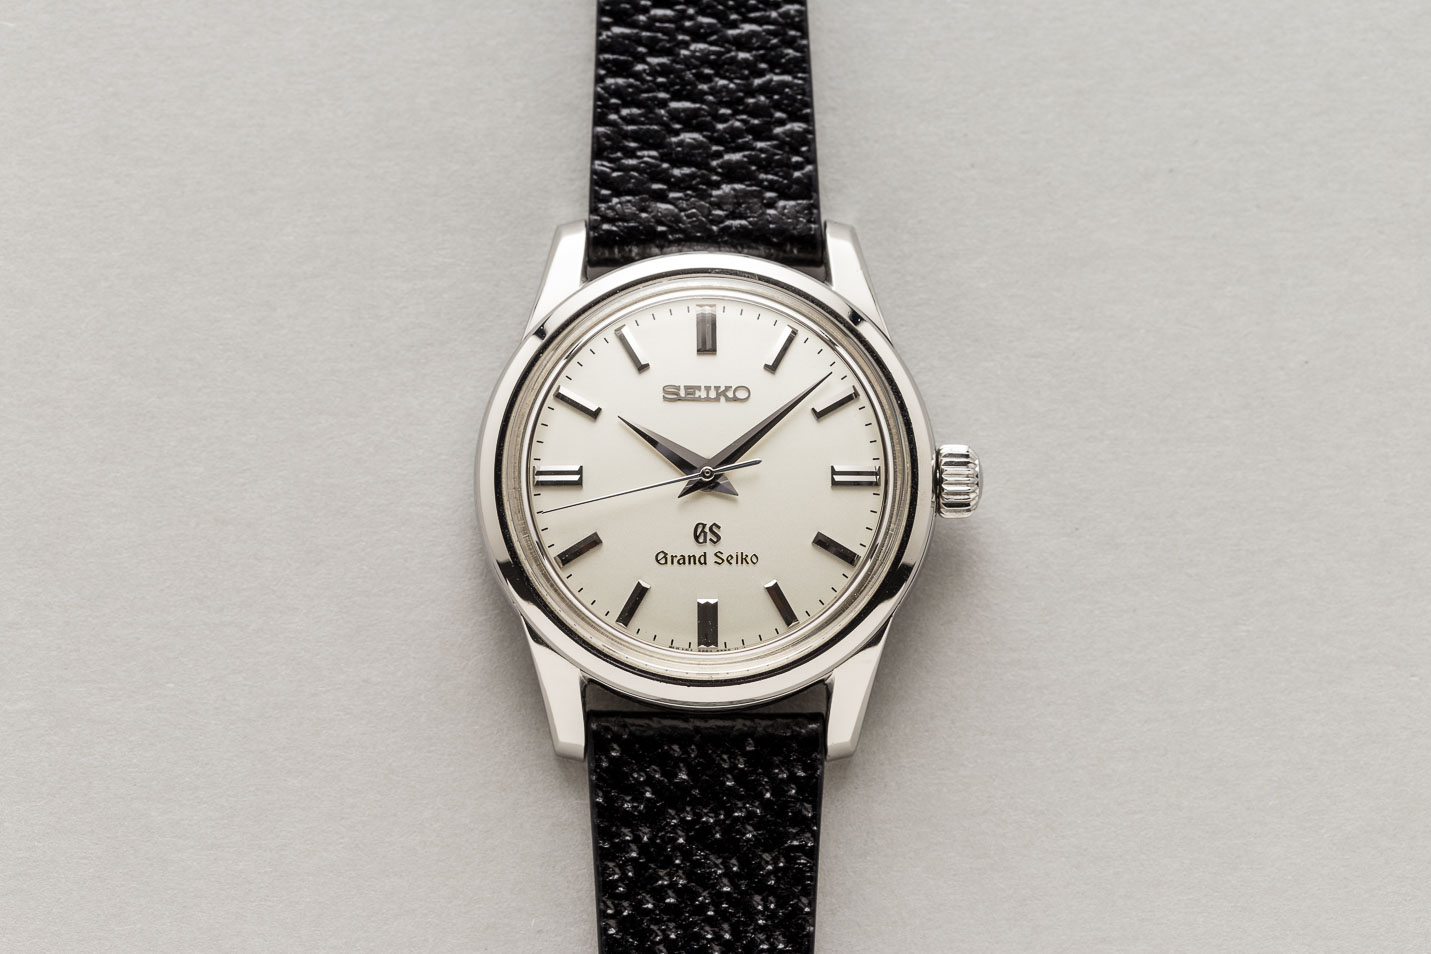 Grand Seiko SBGW001 JDM - Shuck the Oyster Vintage Watches